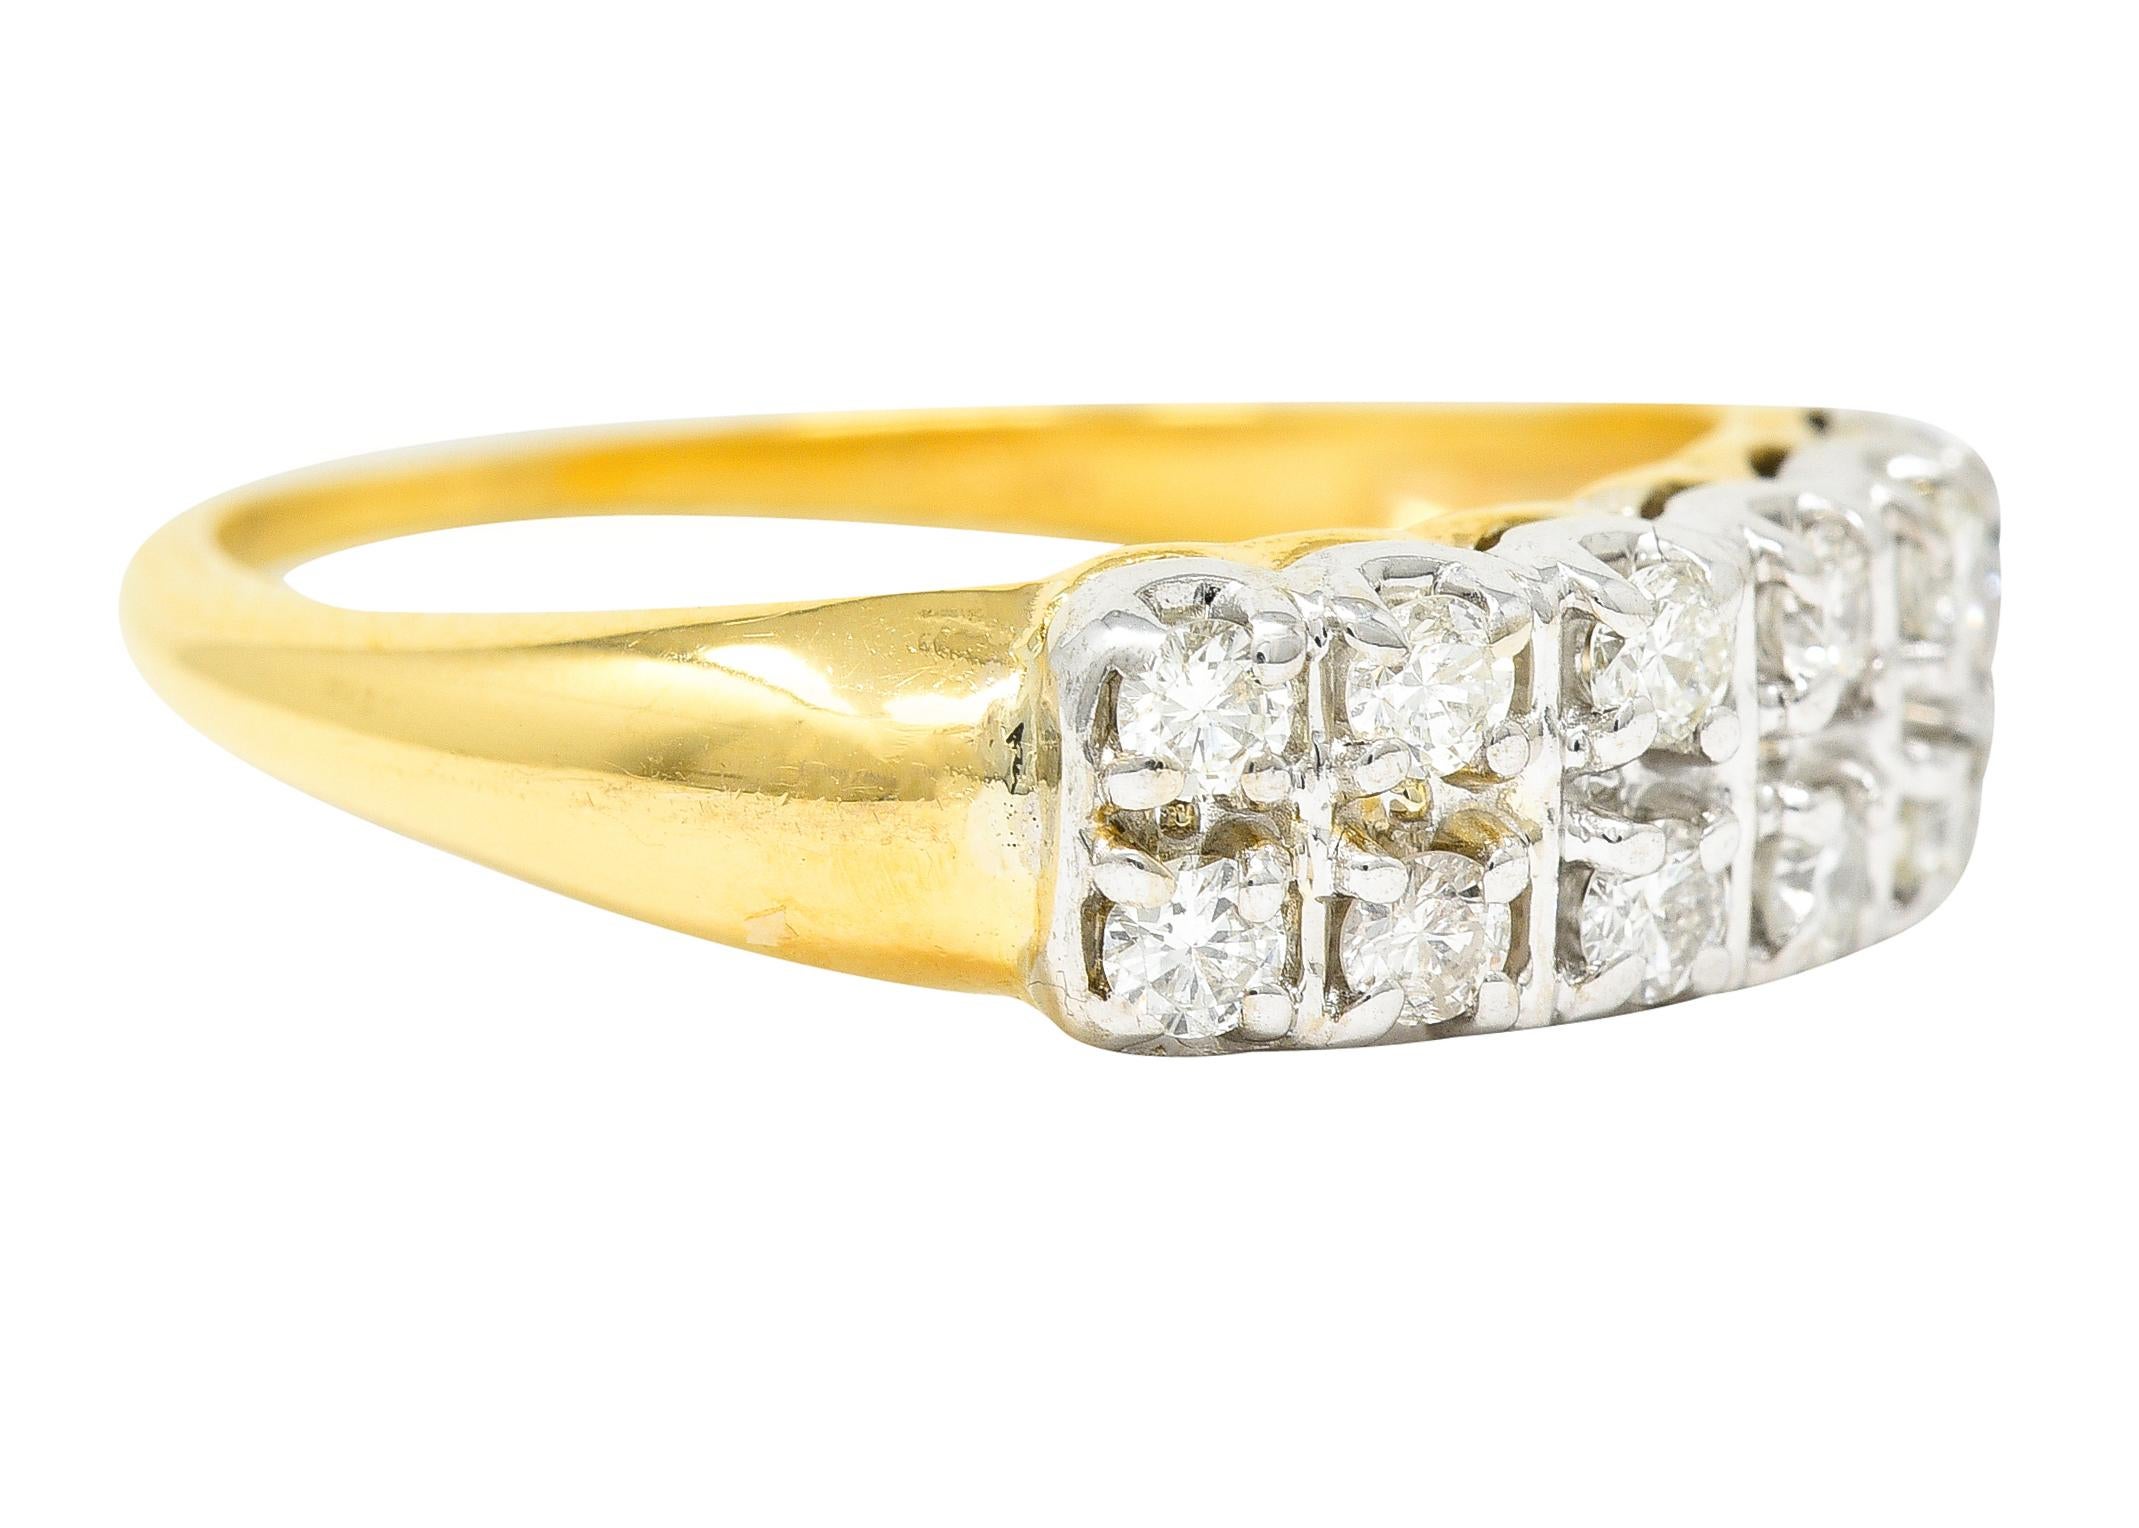 Band ring is set to front with two rows of diamonds. Each individually set in white gold forms. Weighing in total approximately 0.35 carat - H/I color with SI clarity. Completed by a polished yellow gold shank. Tested as 14 karat gold. With partial